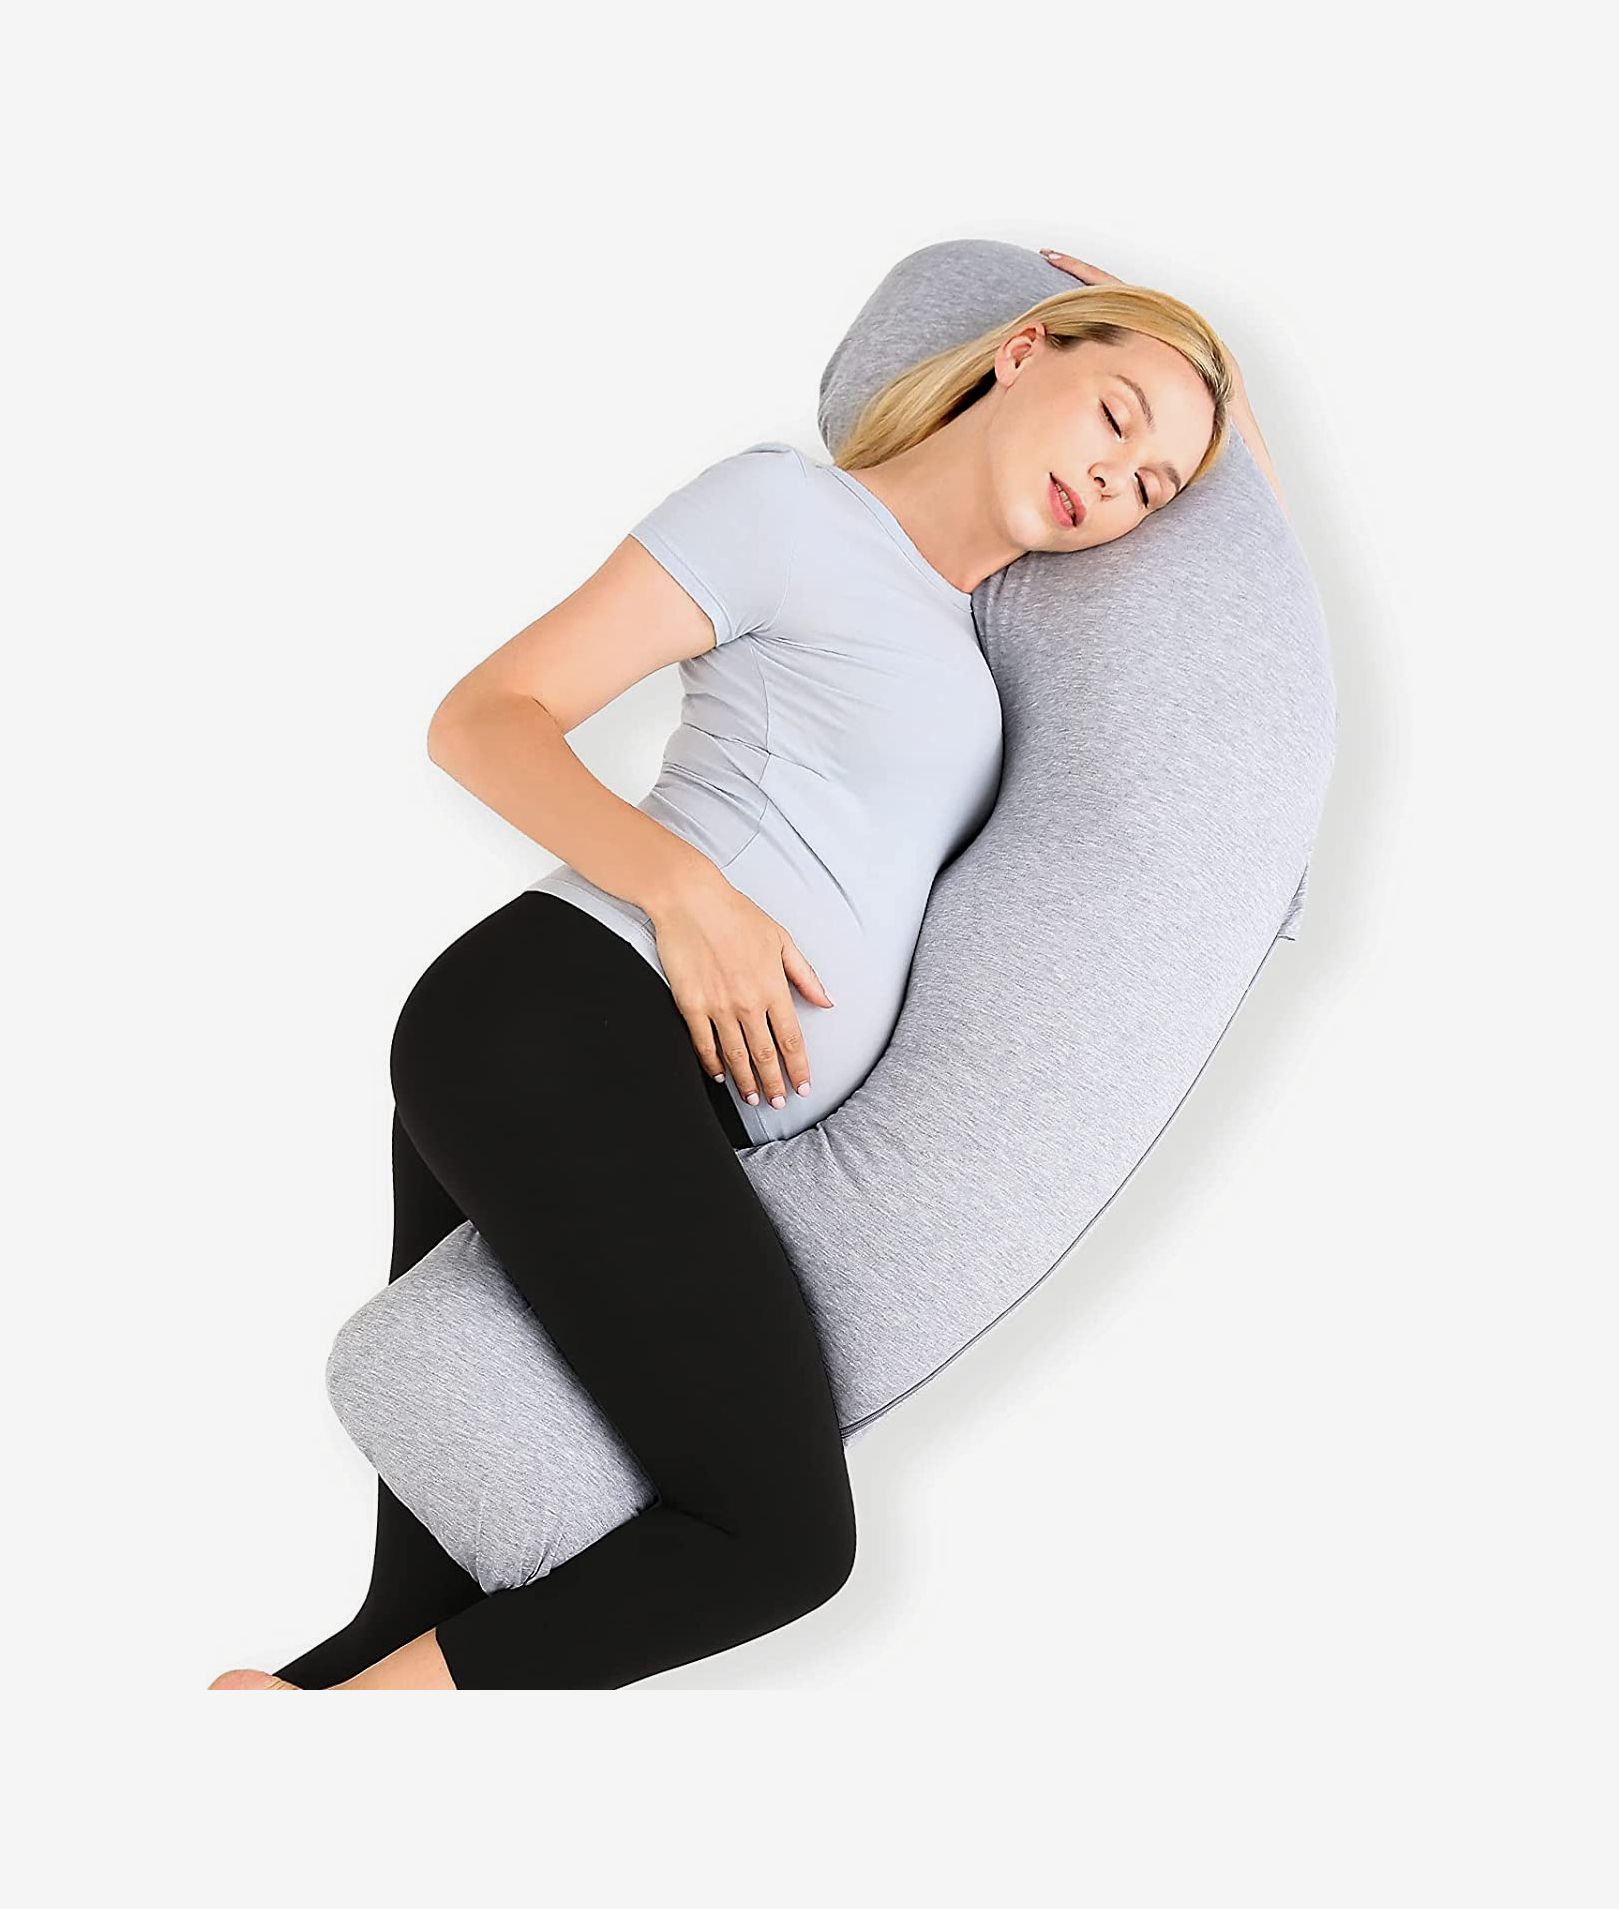 ORTHOPAEDIC MATERNITY PREGNANCY NURSING BABY SUPPORT LUXURY SHAPED PILLOW 